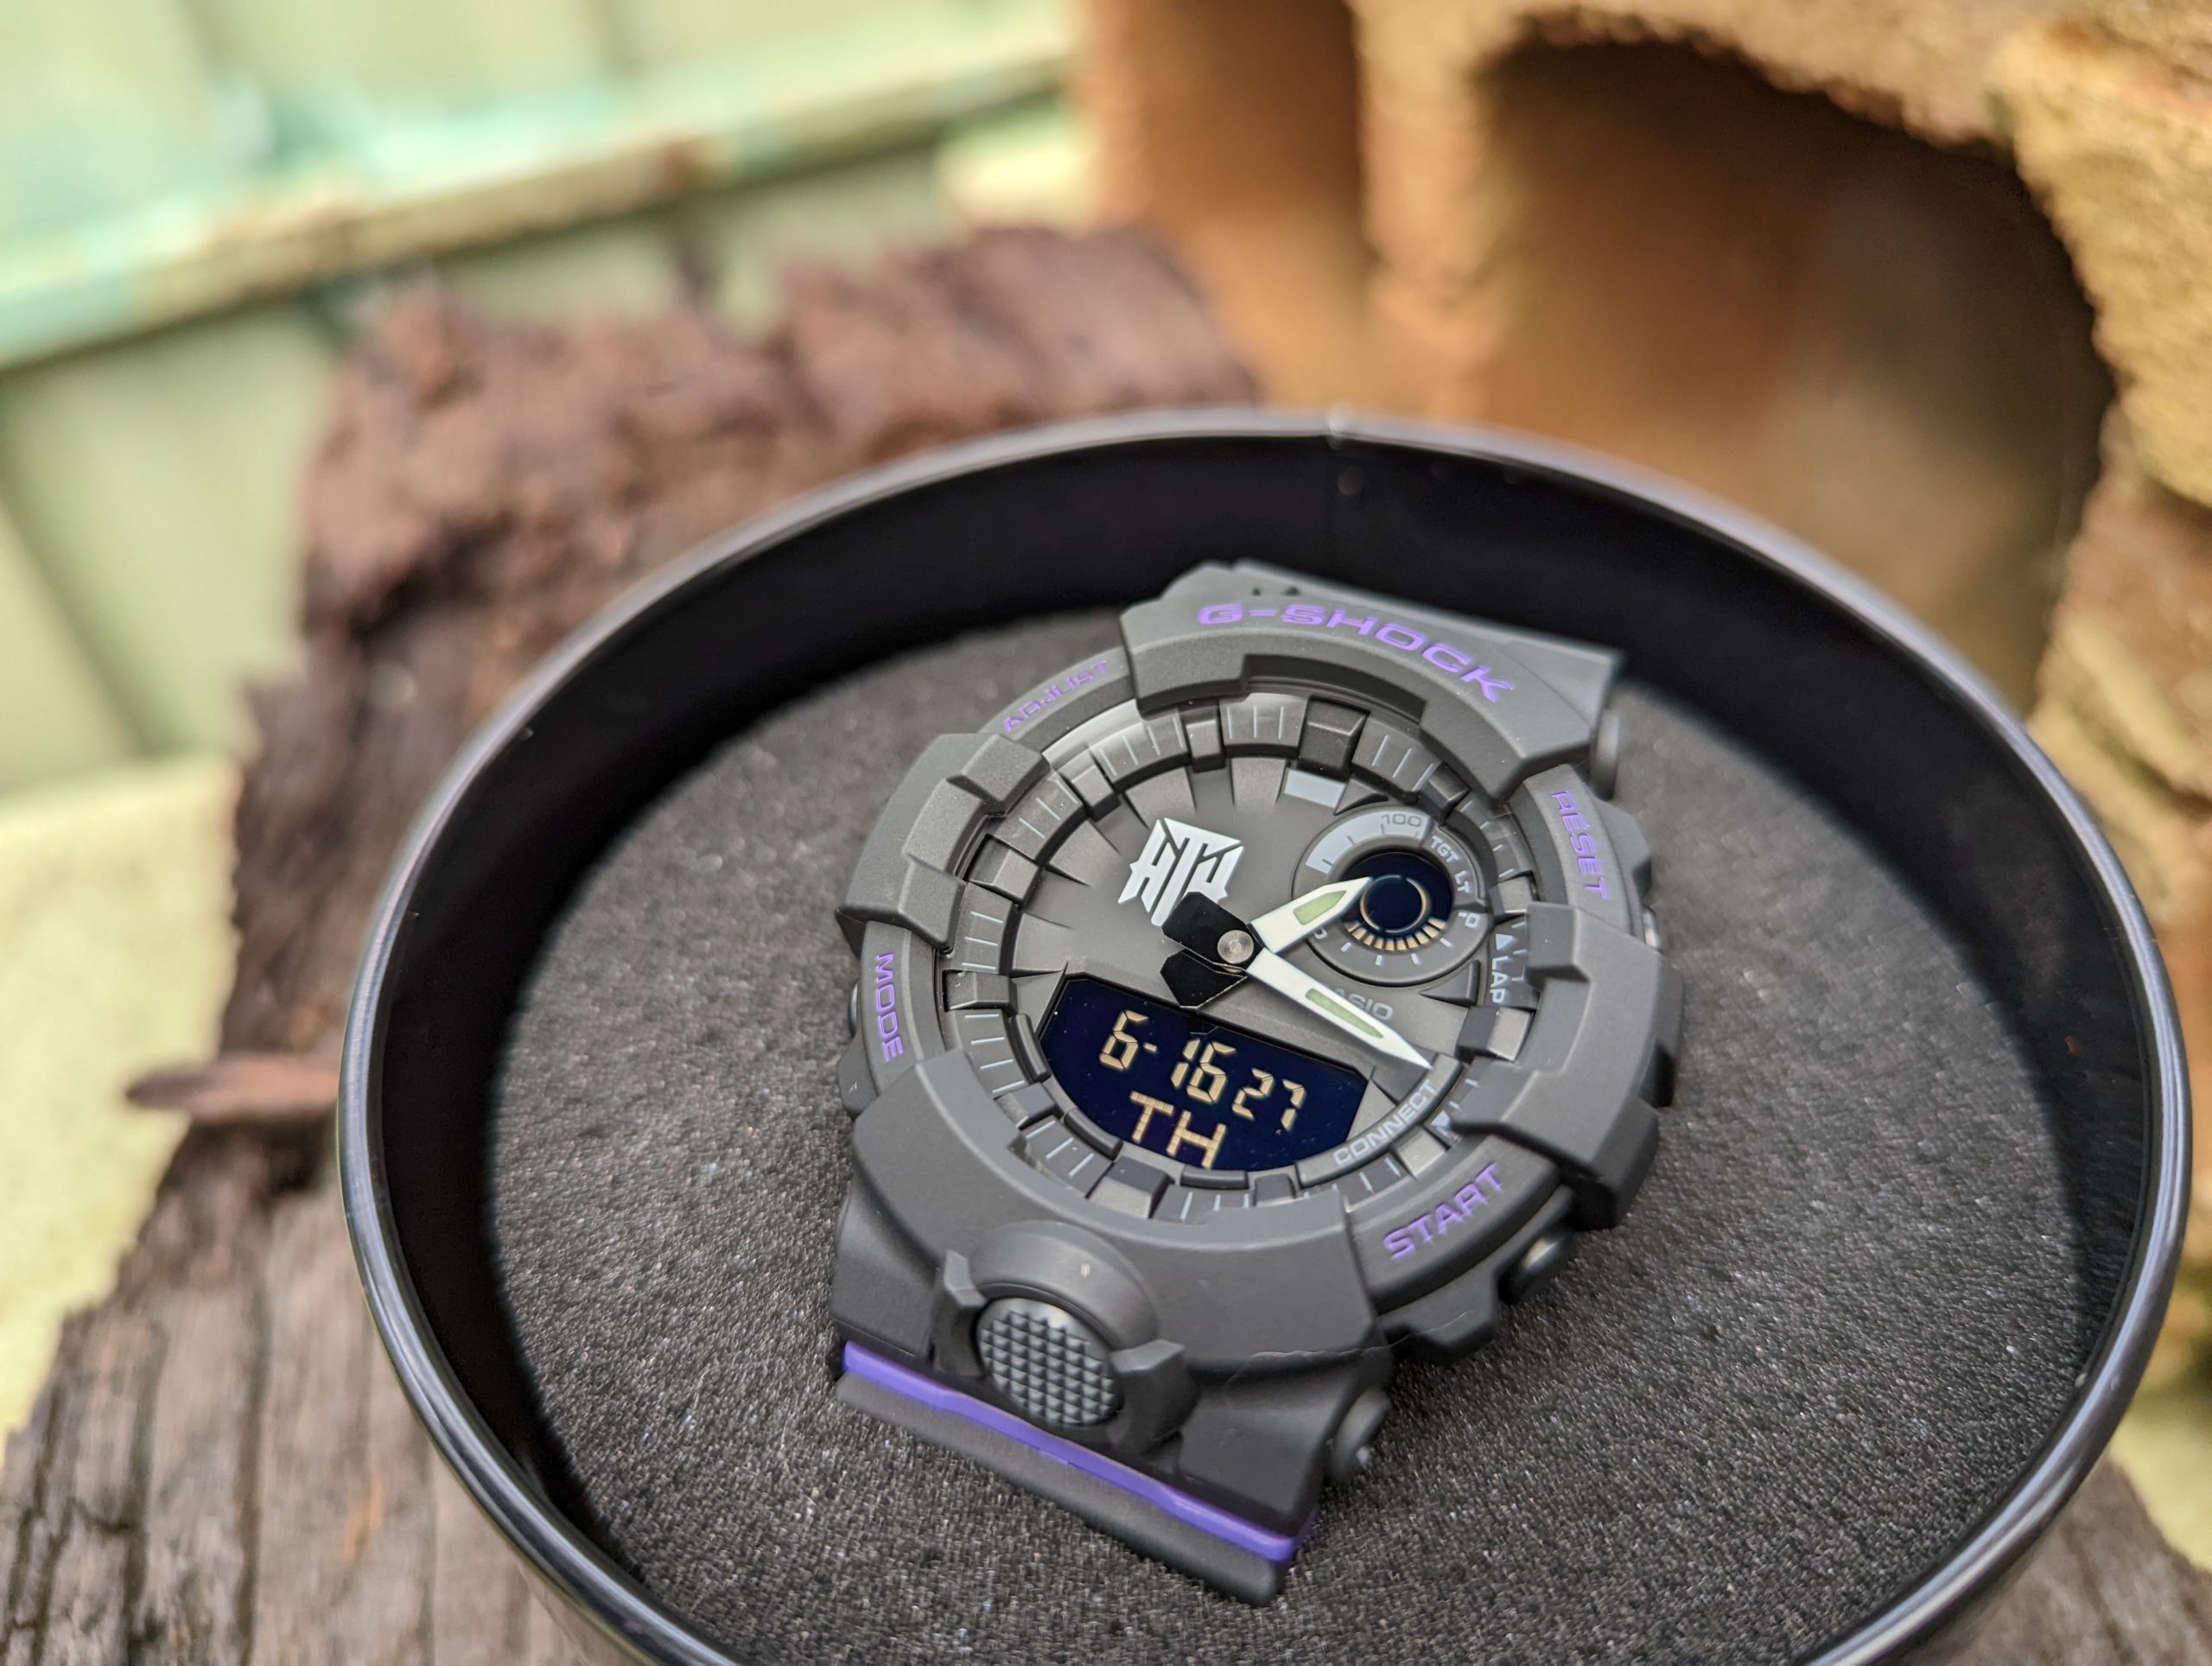 The Hilltop Hoods G-SHOCK watch hands on – It’s so simple, slick and stylish